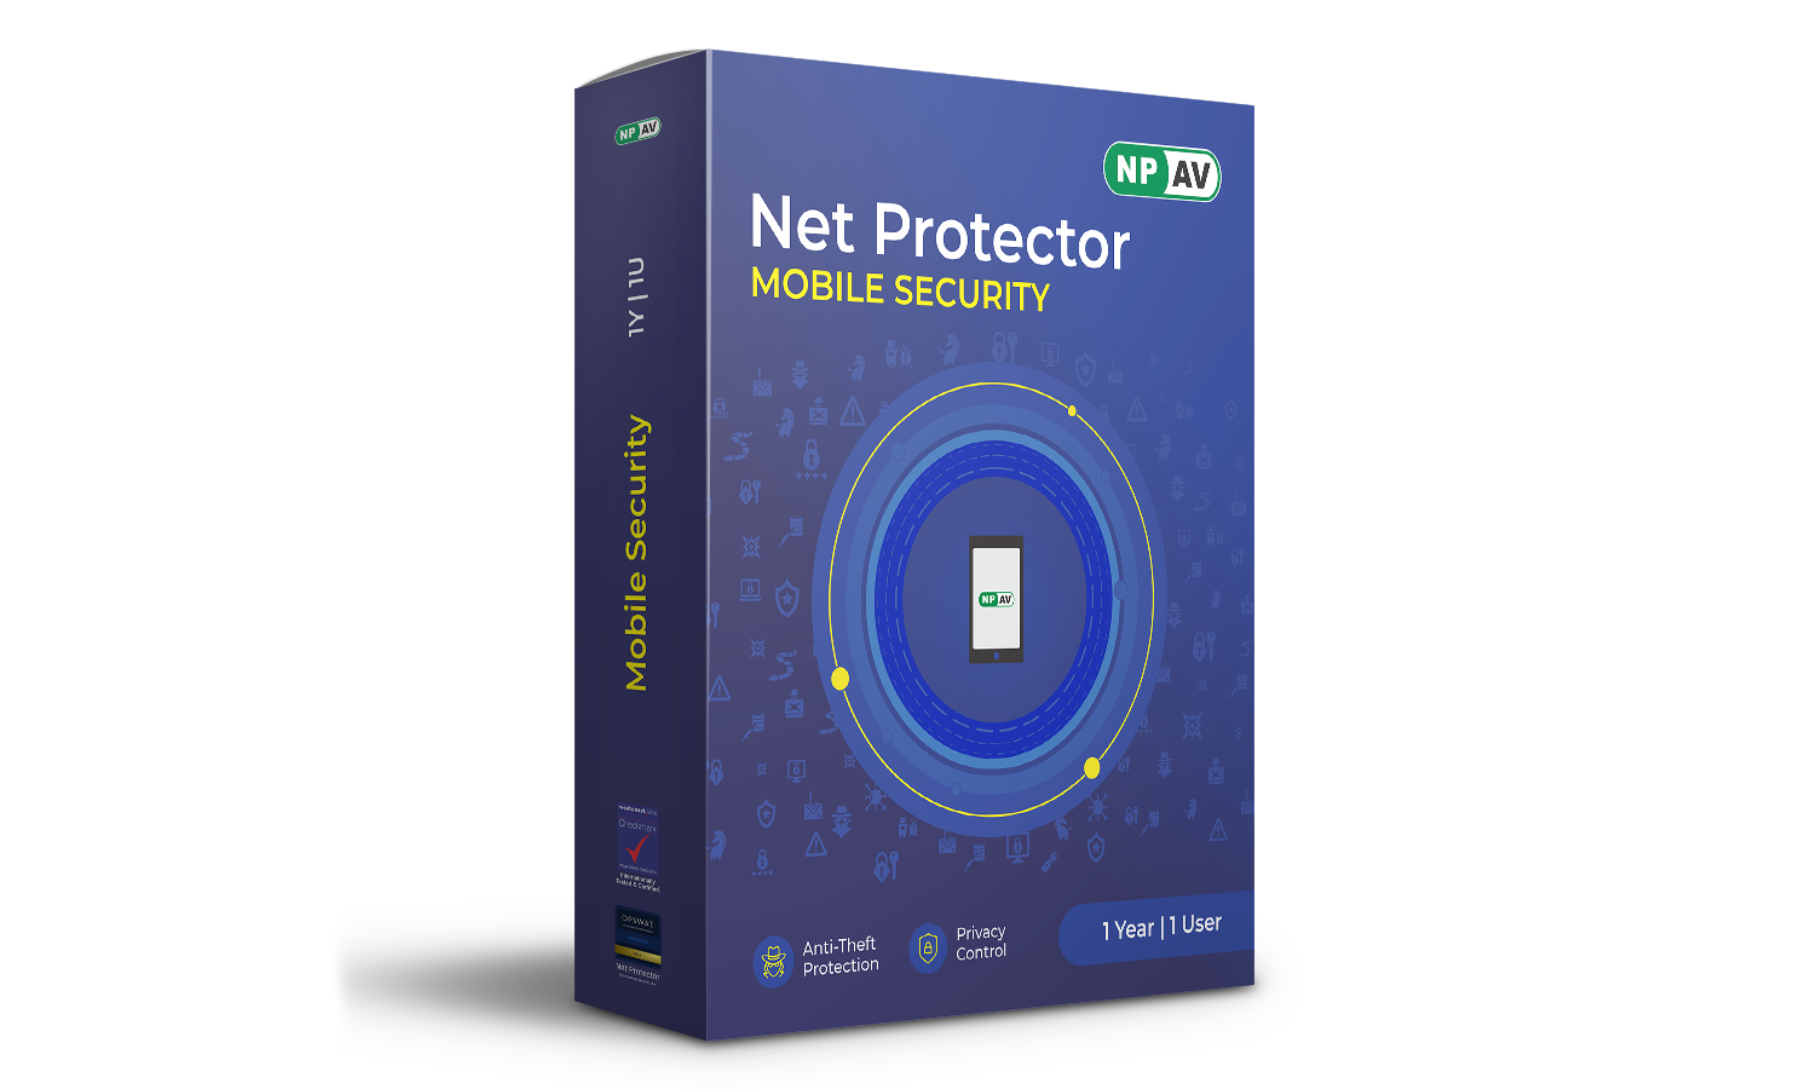 Net Protector Mobile Security